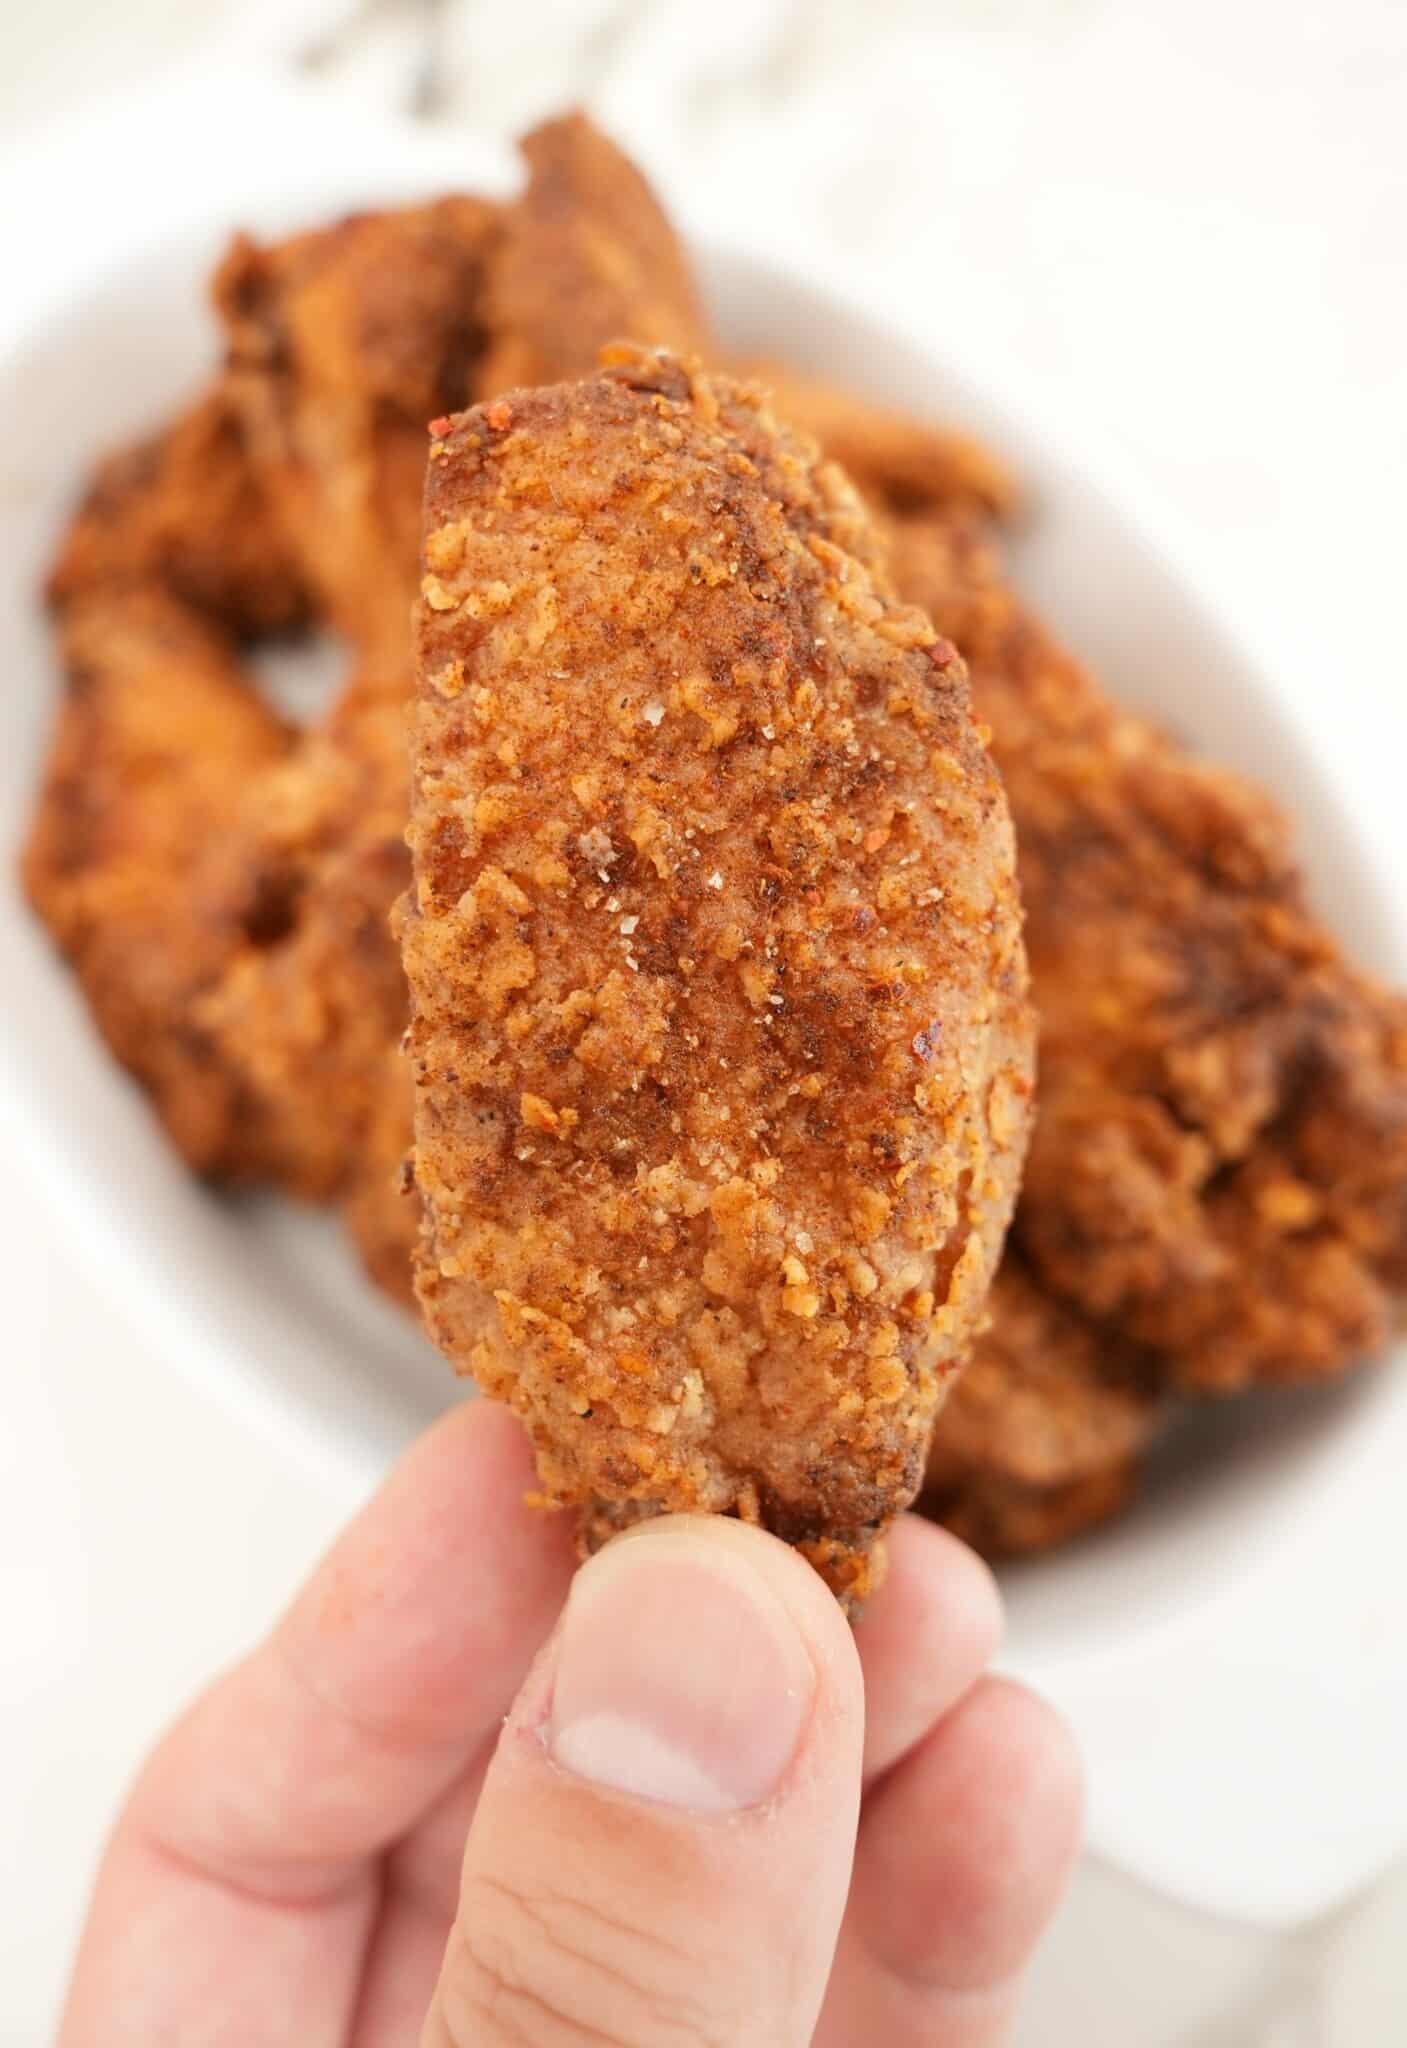 https://cjeatsrecipes.com/wp-content/uploads/2022/04/5-Spiced-Chicken-Wings-Cover-min-scaled.jpg